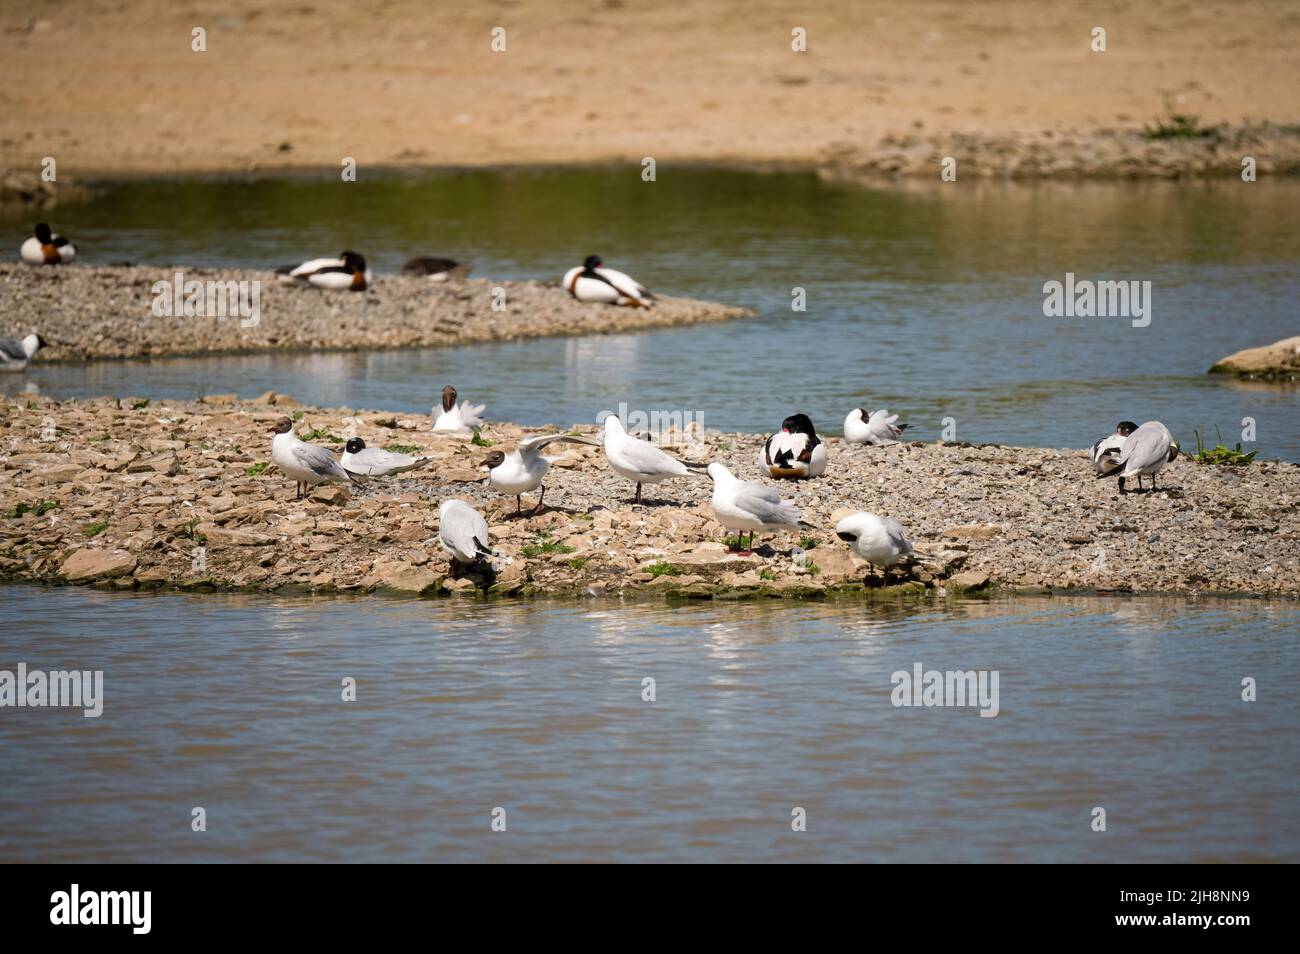 waterfowl, ducks, geese, swans and seagulls on a sanctuary lake island Stock Photo